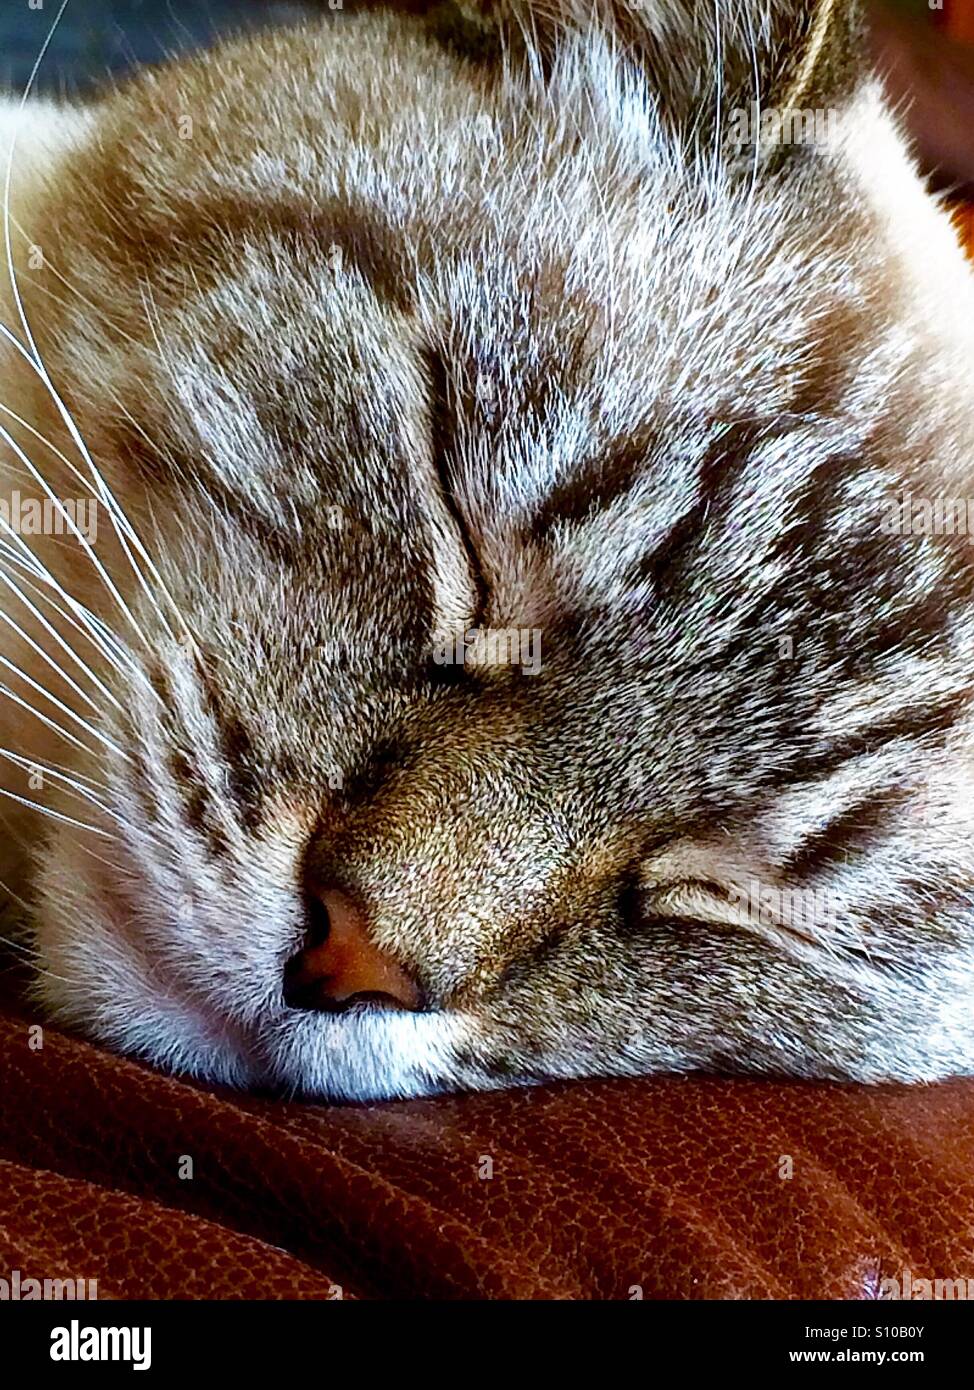 Close up head shot of a cat sleeping on a leather couch Stock Photo